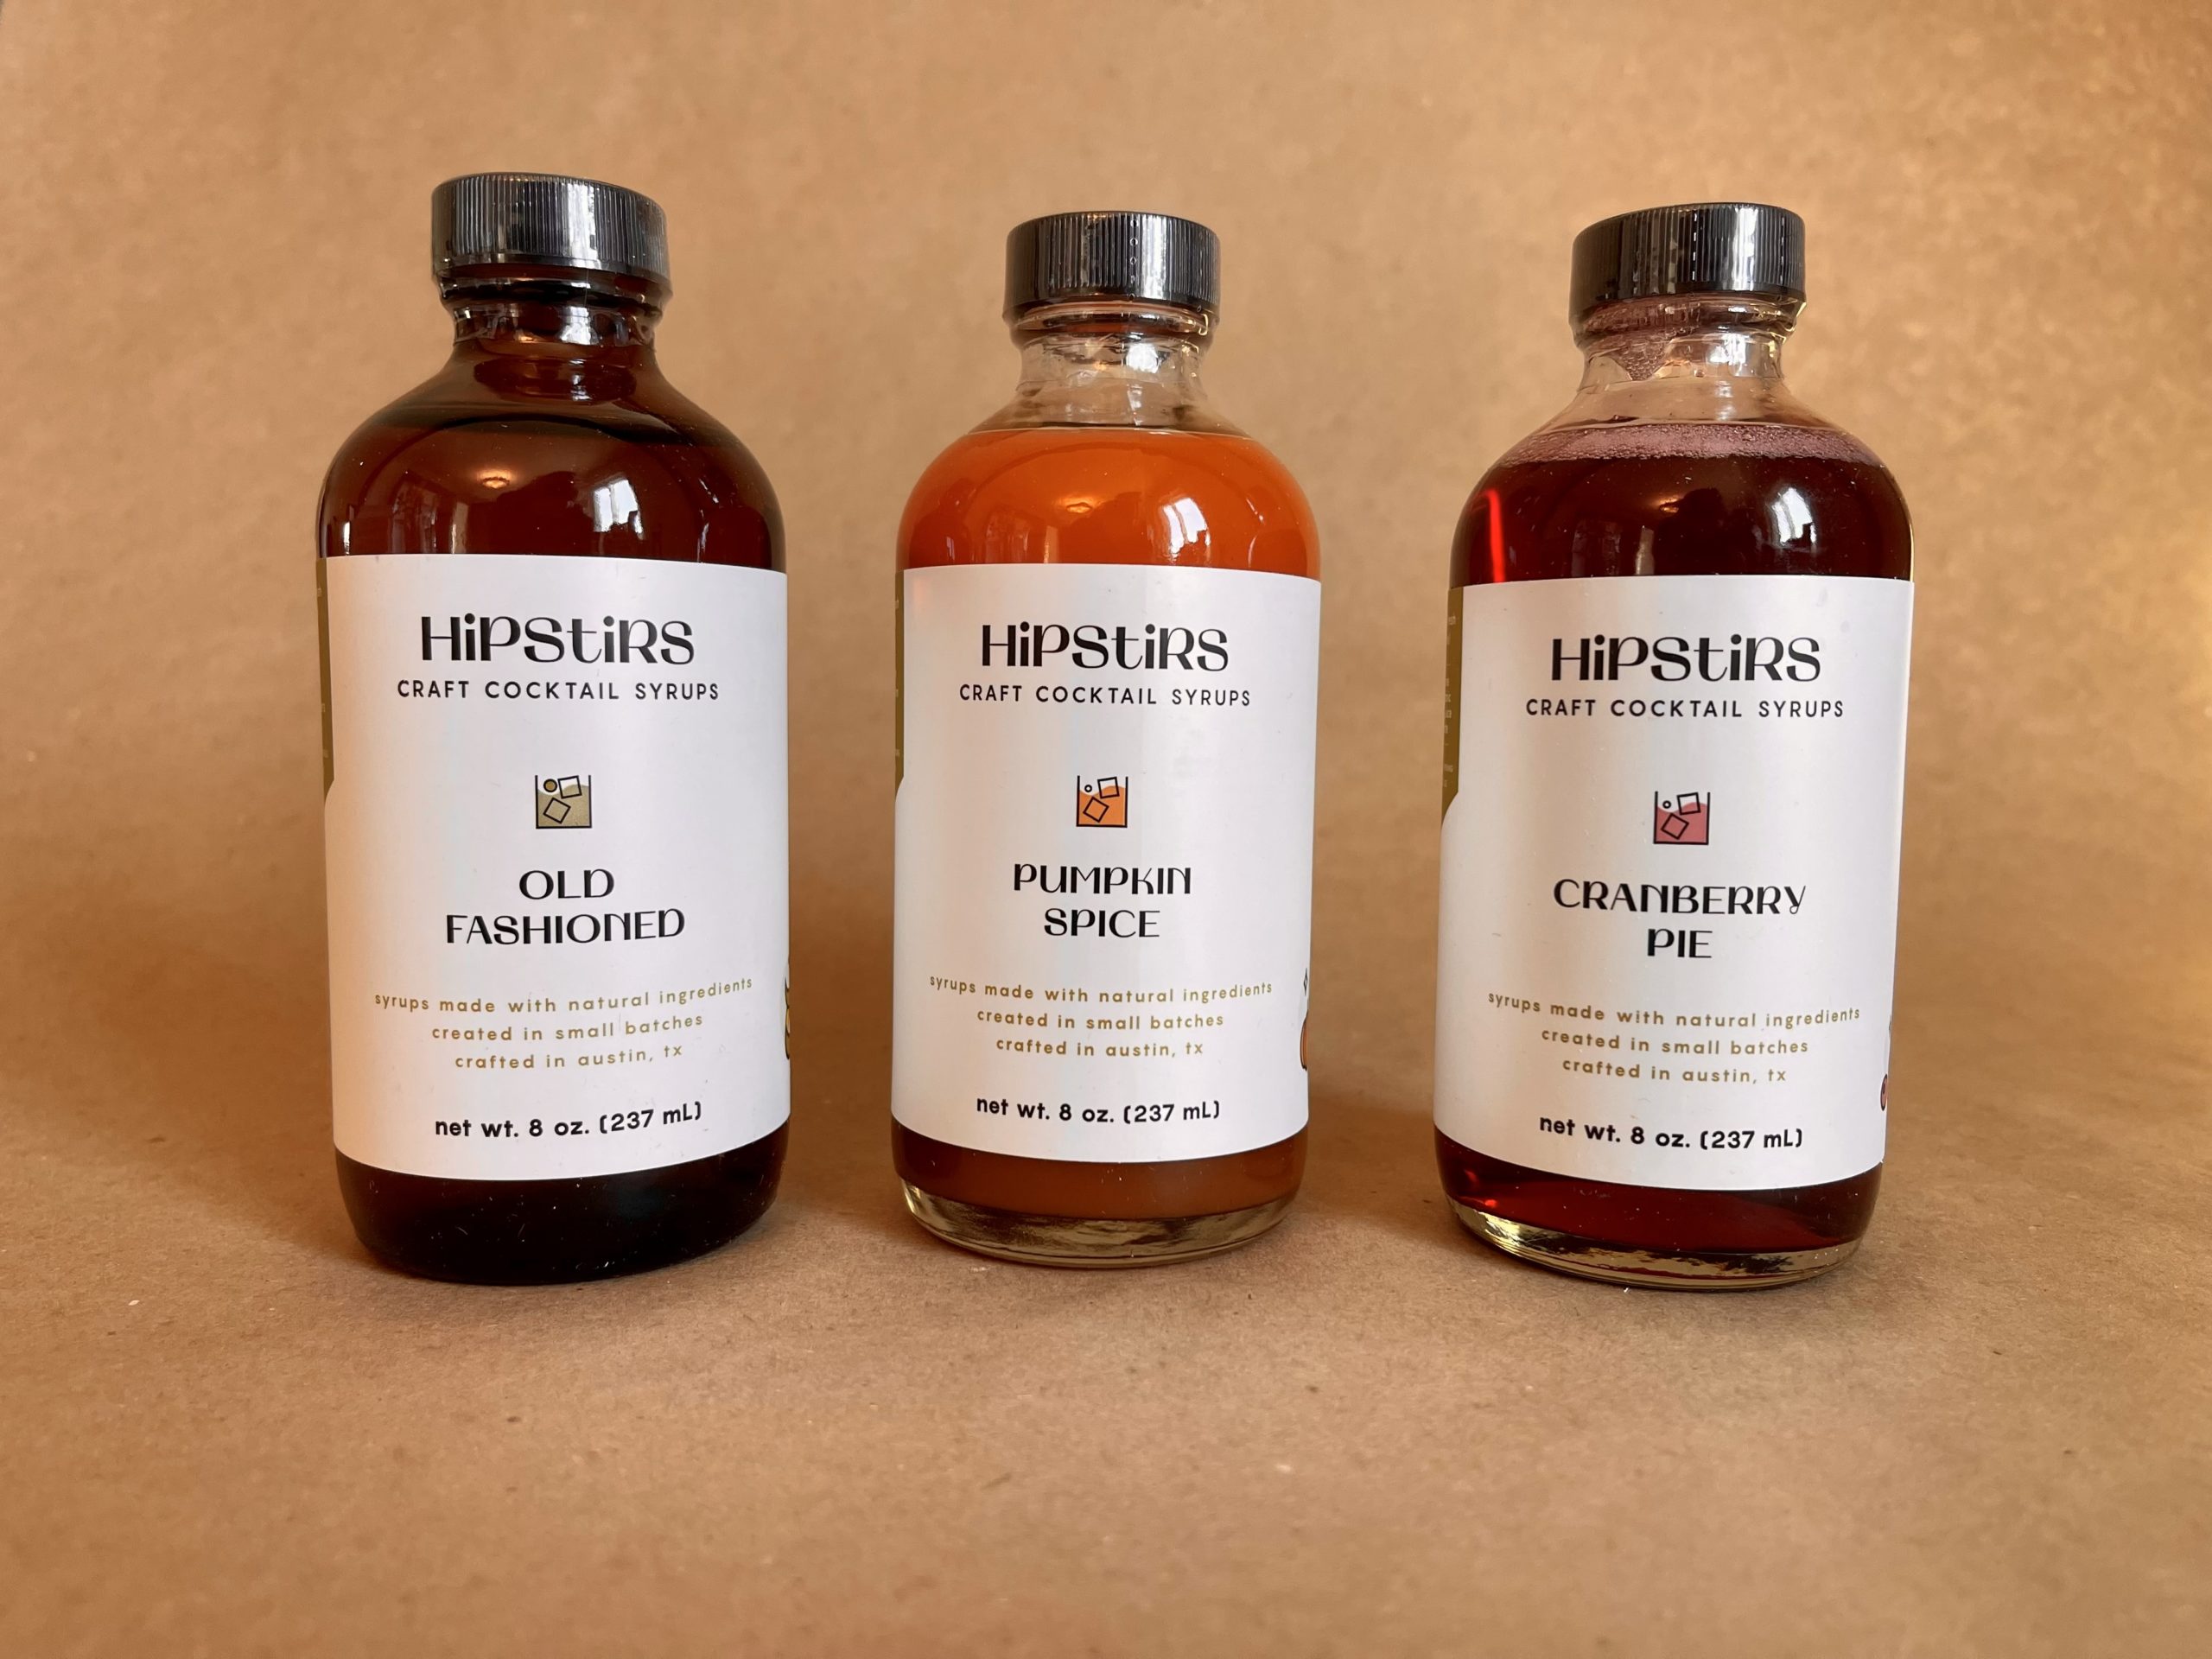 Photo of 3 Syrups(Old Fashioned, Pumpkin Spice, Cranberry Pie) From Hipstirs.